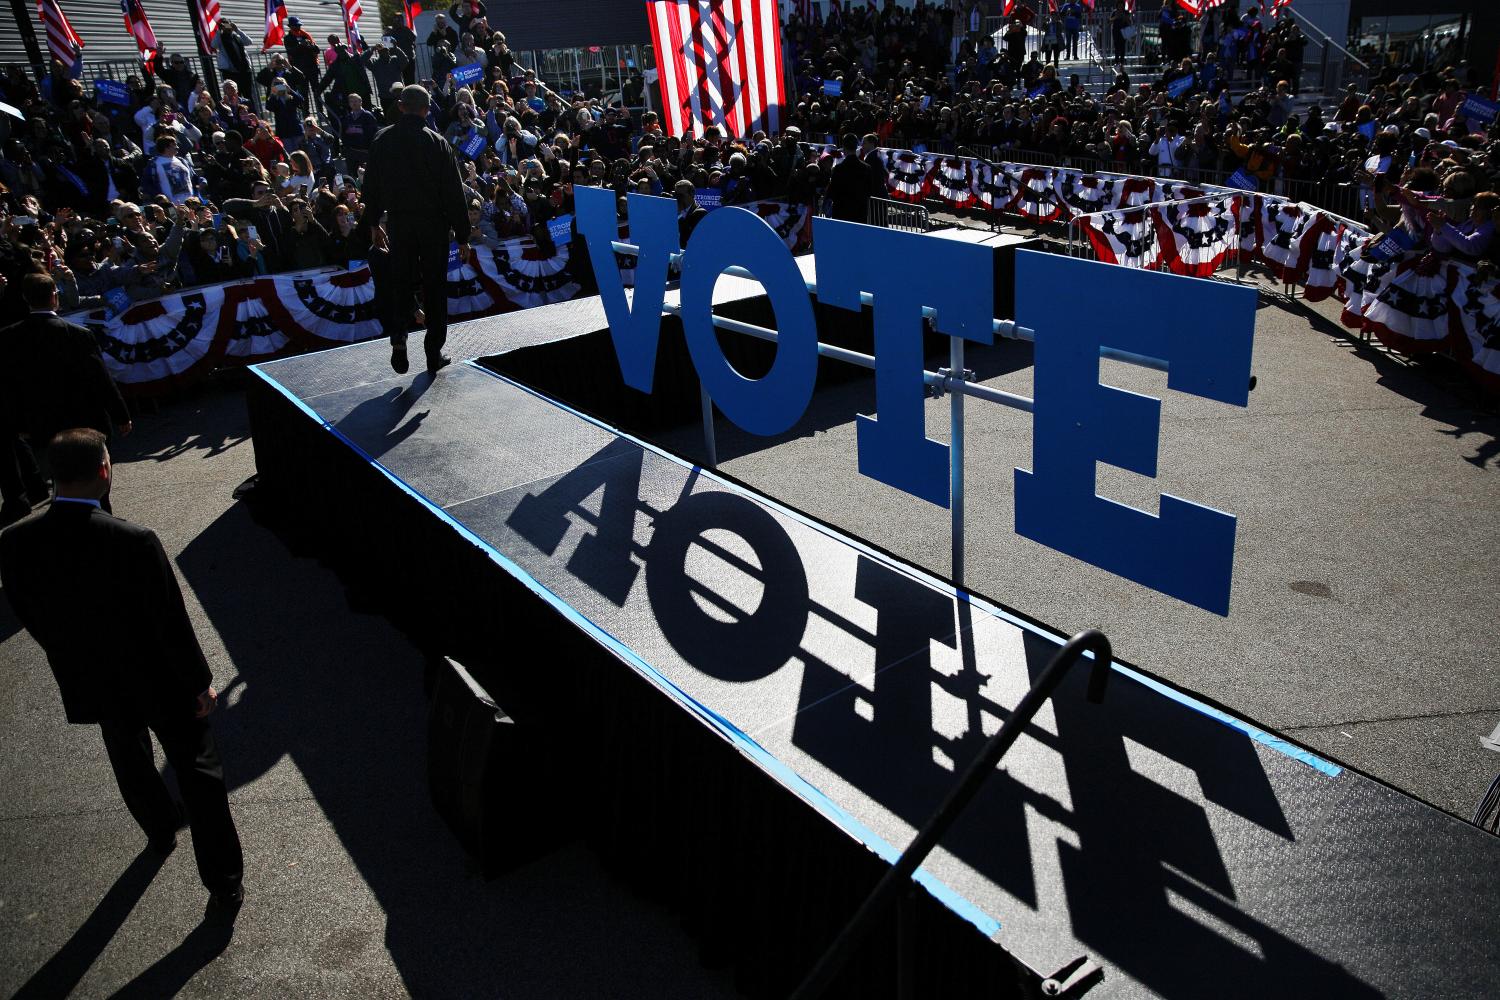 Image of a "vote" sign after a speech by Pres. Obama in Ohio